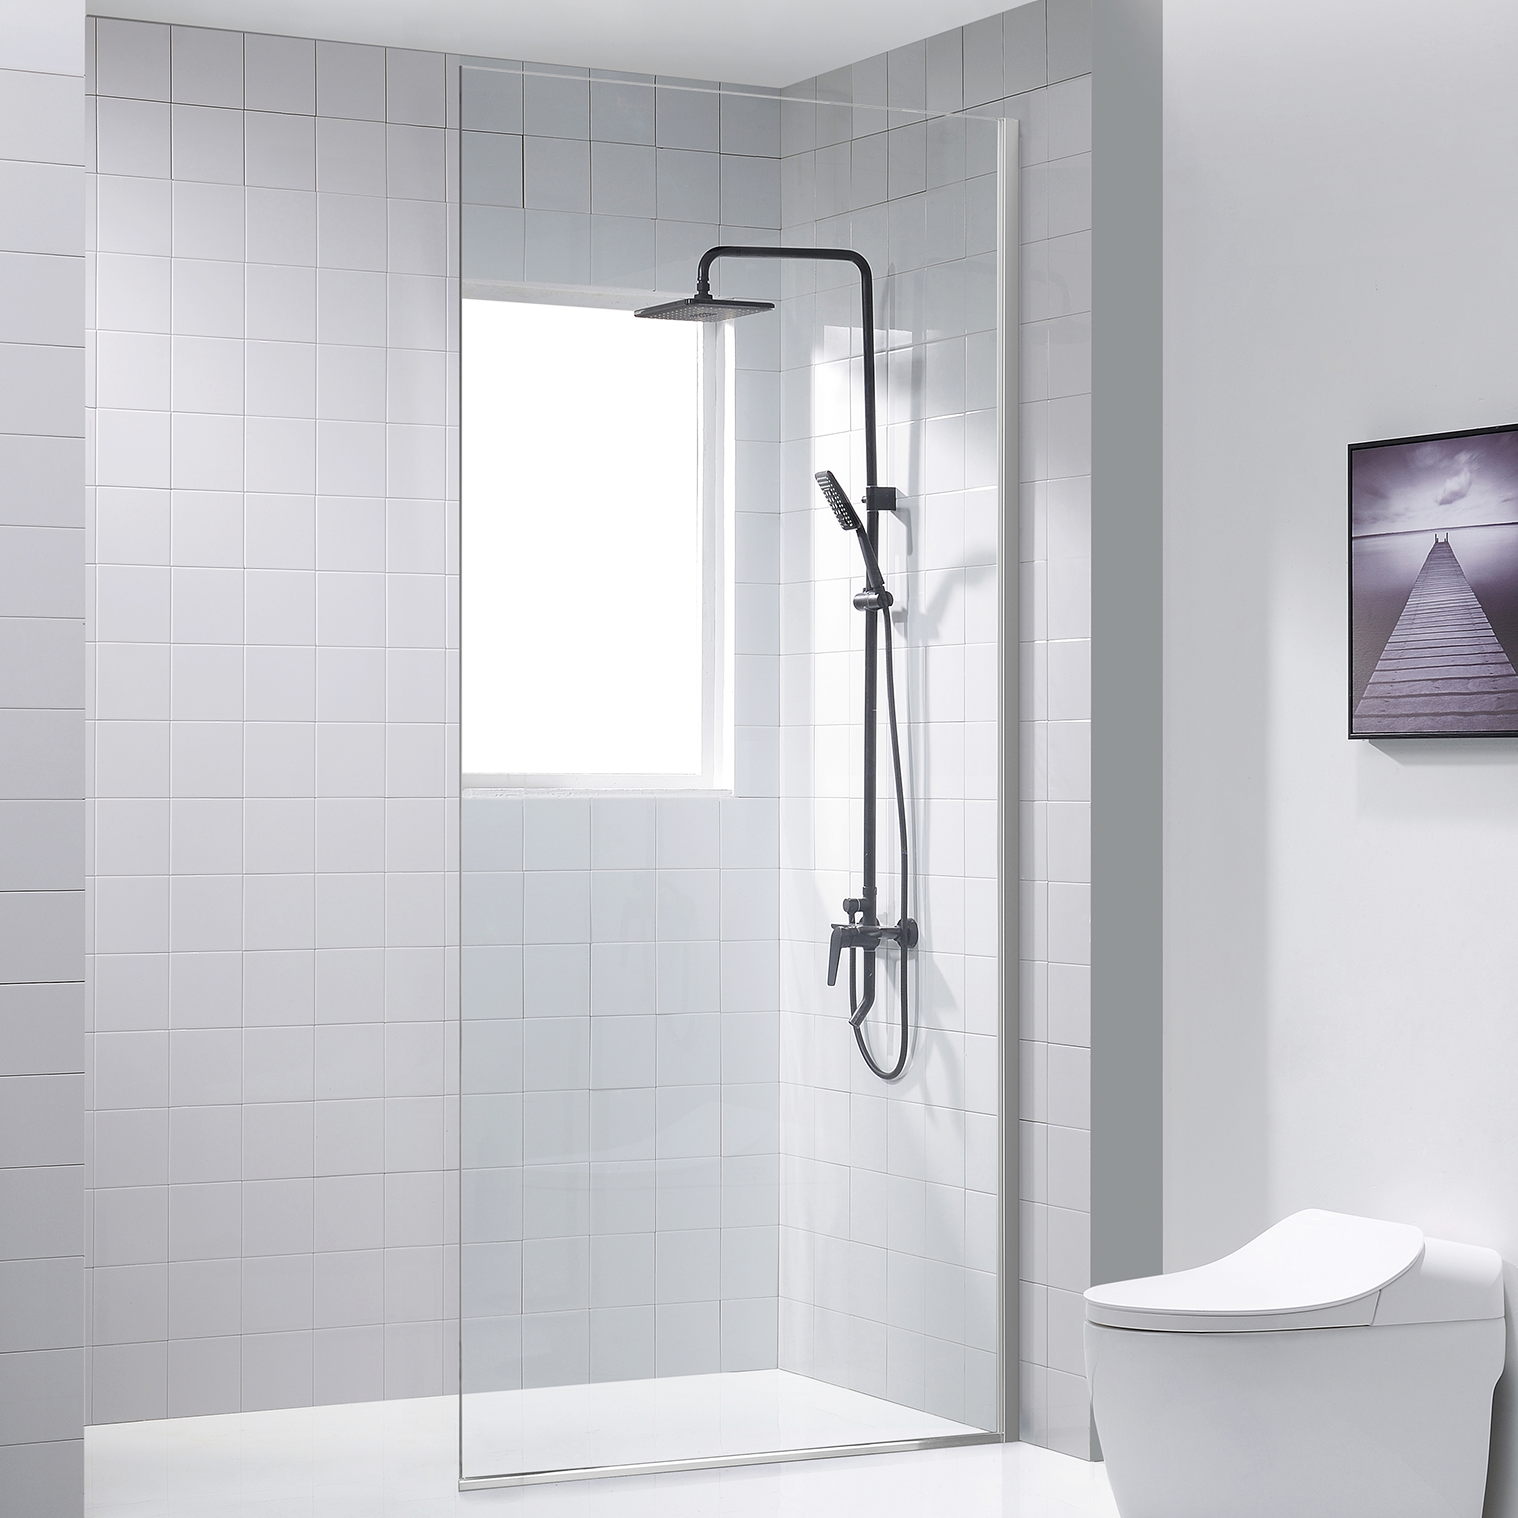 Dreamwerks 32"W x 79"H Frameless Fixed Shower Door in Chrome - Available in Clear or Frosted Glass